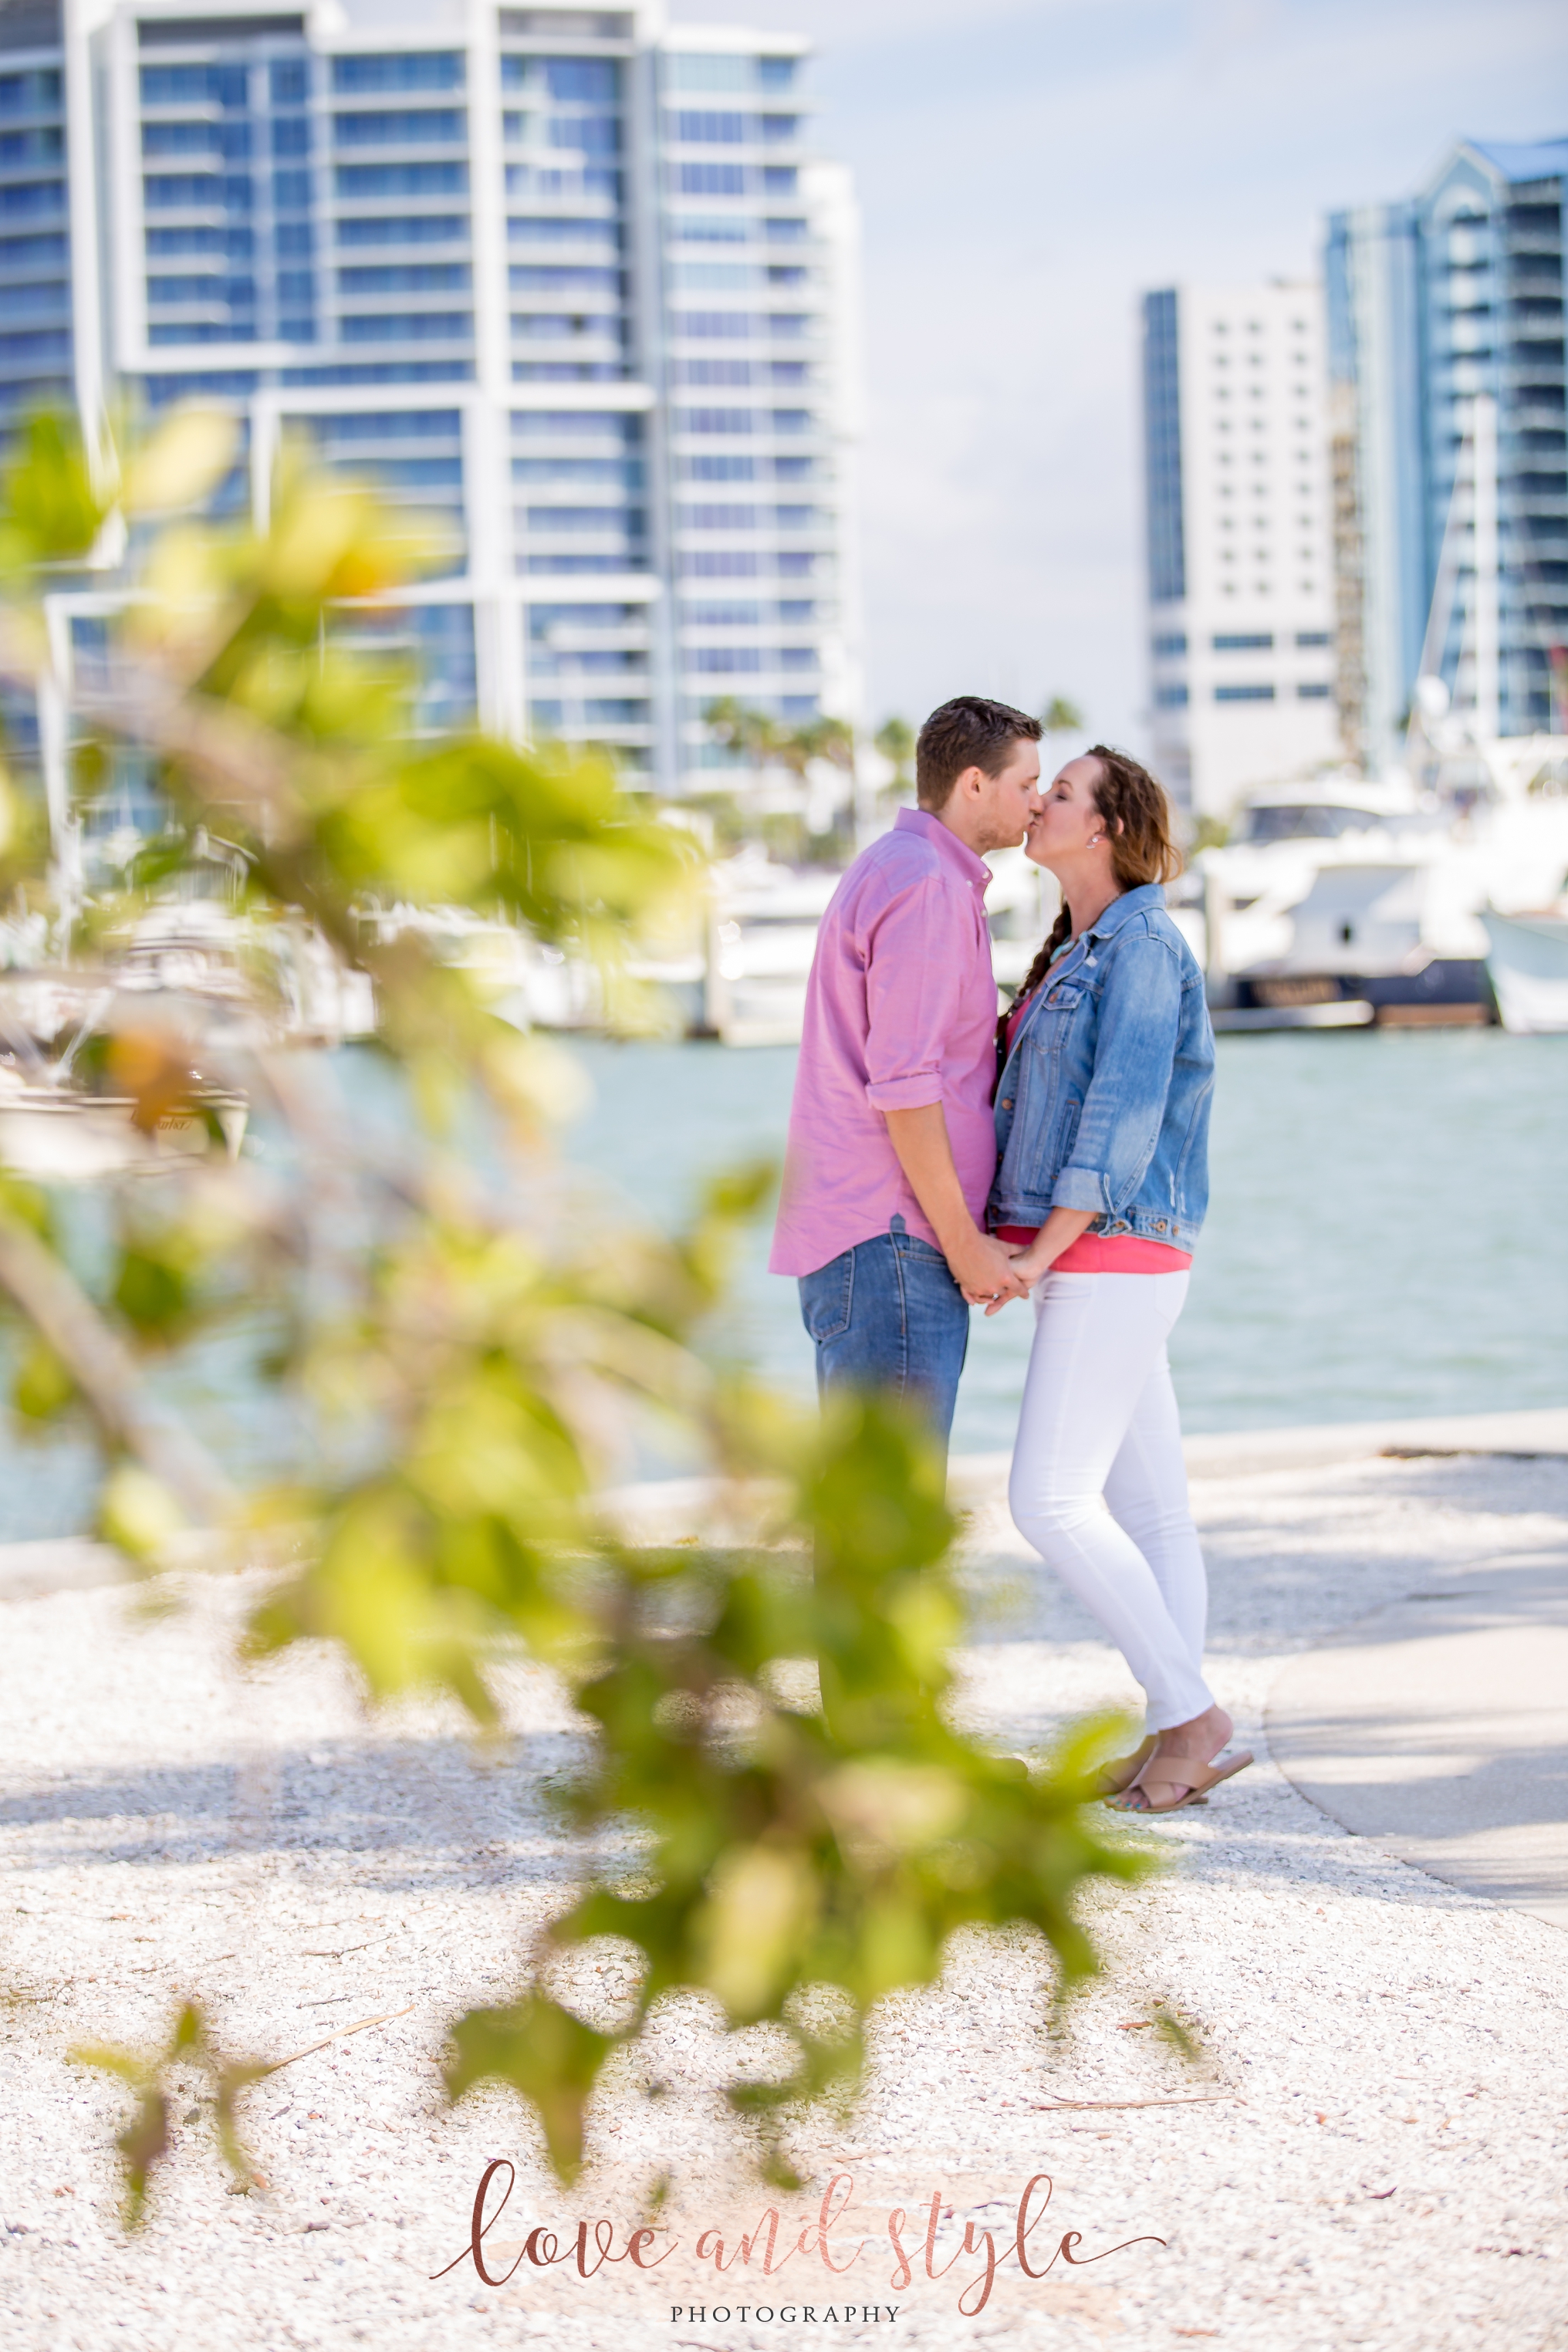 Sarasota Engagement Photography at Bayfront Park in the morning with downtown Sarasota in the background